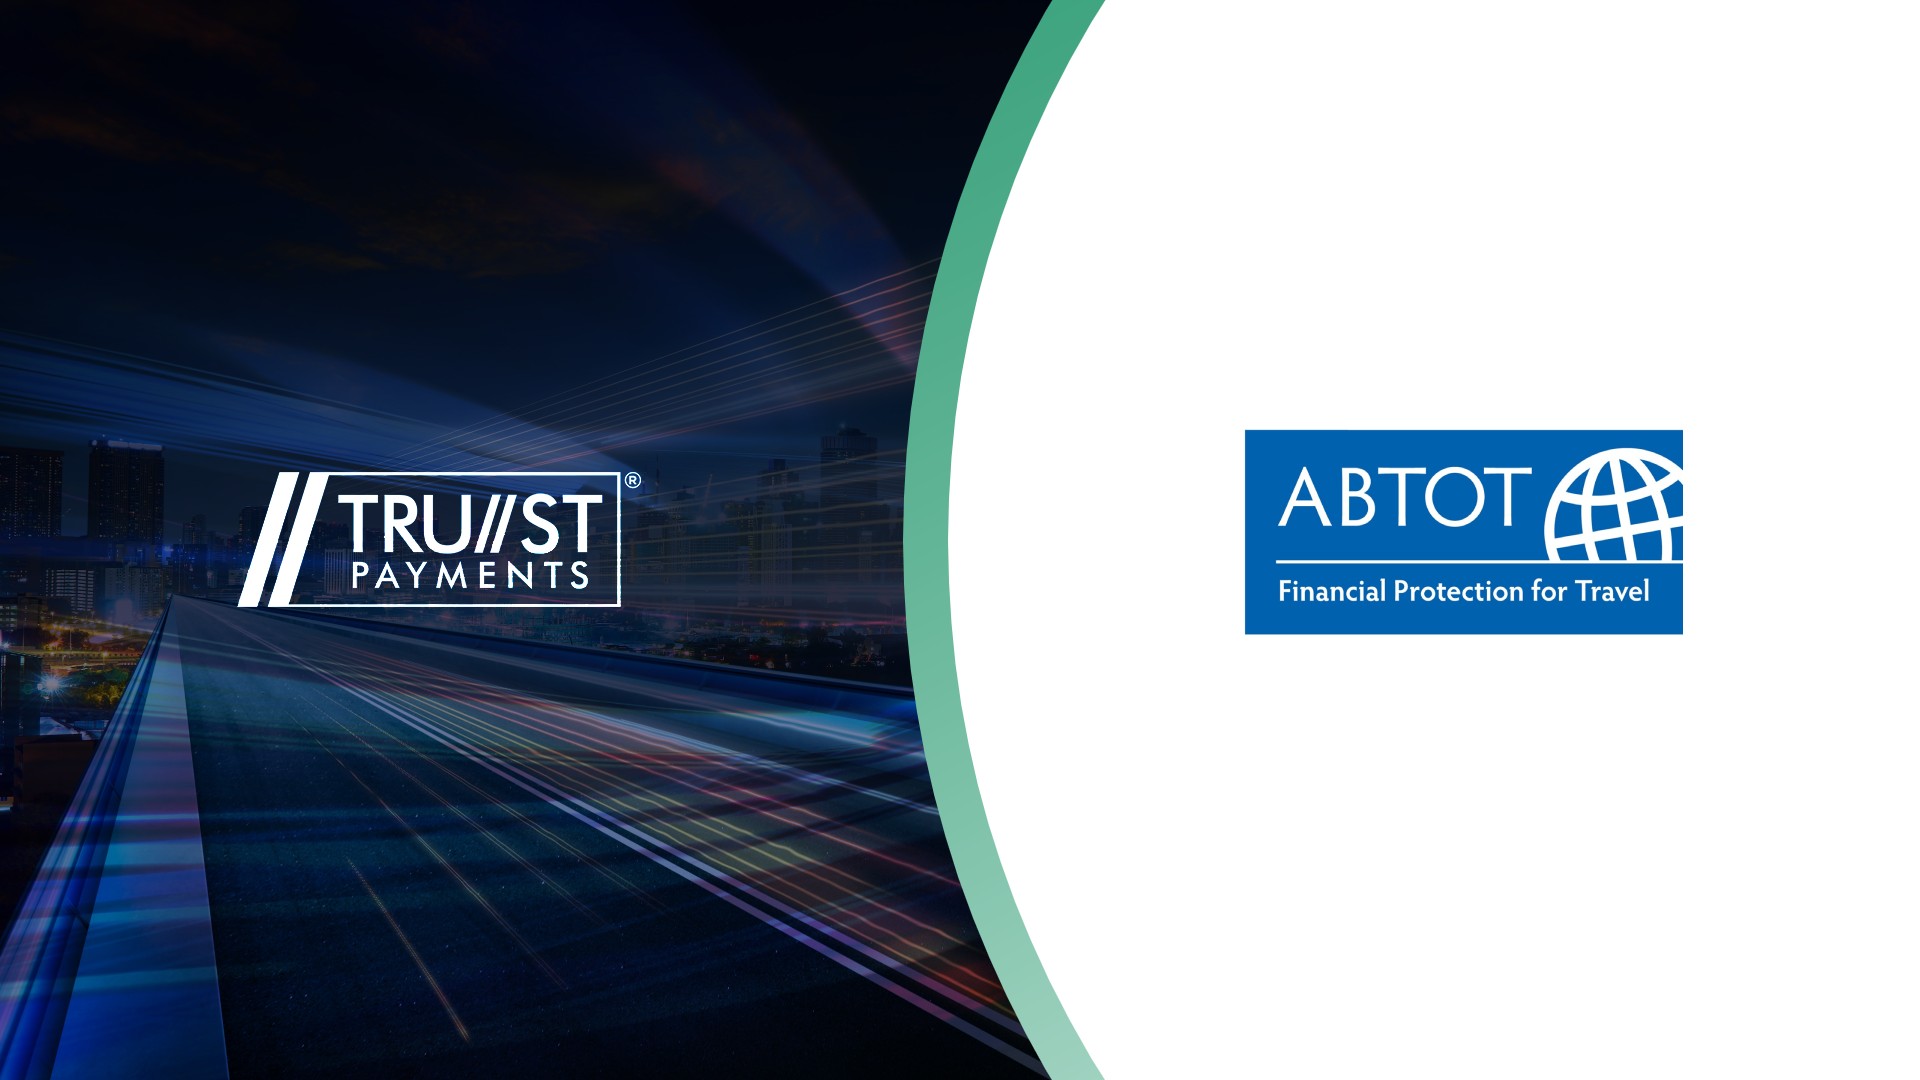 ABTOT chooses Trust Payments to be its newest payments partner